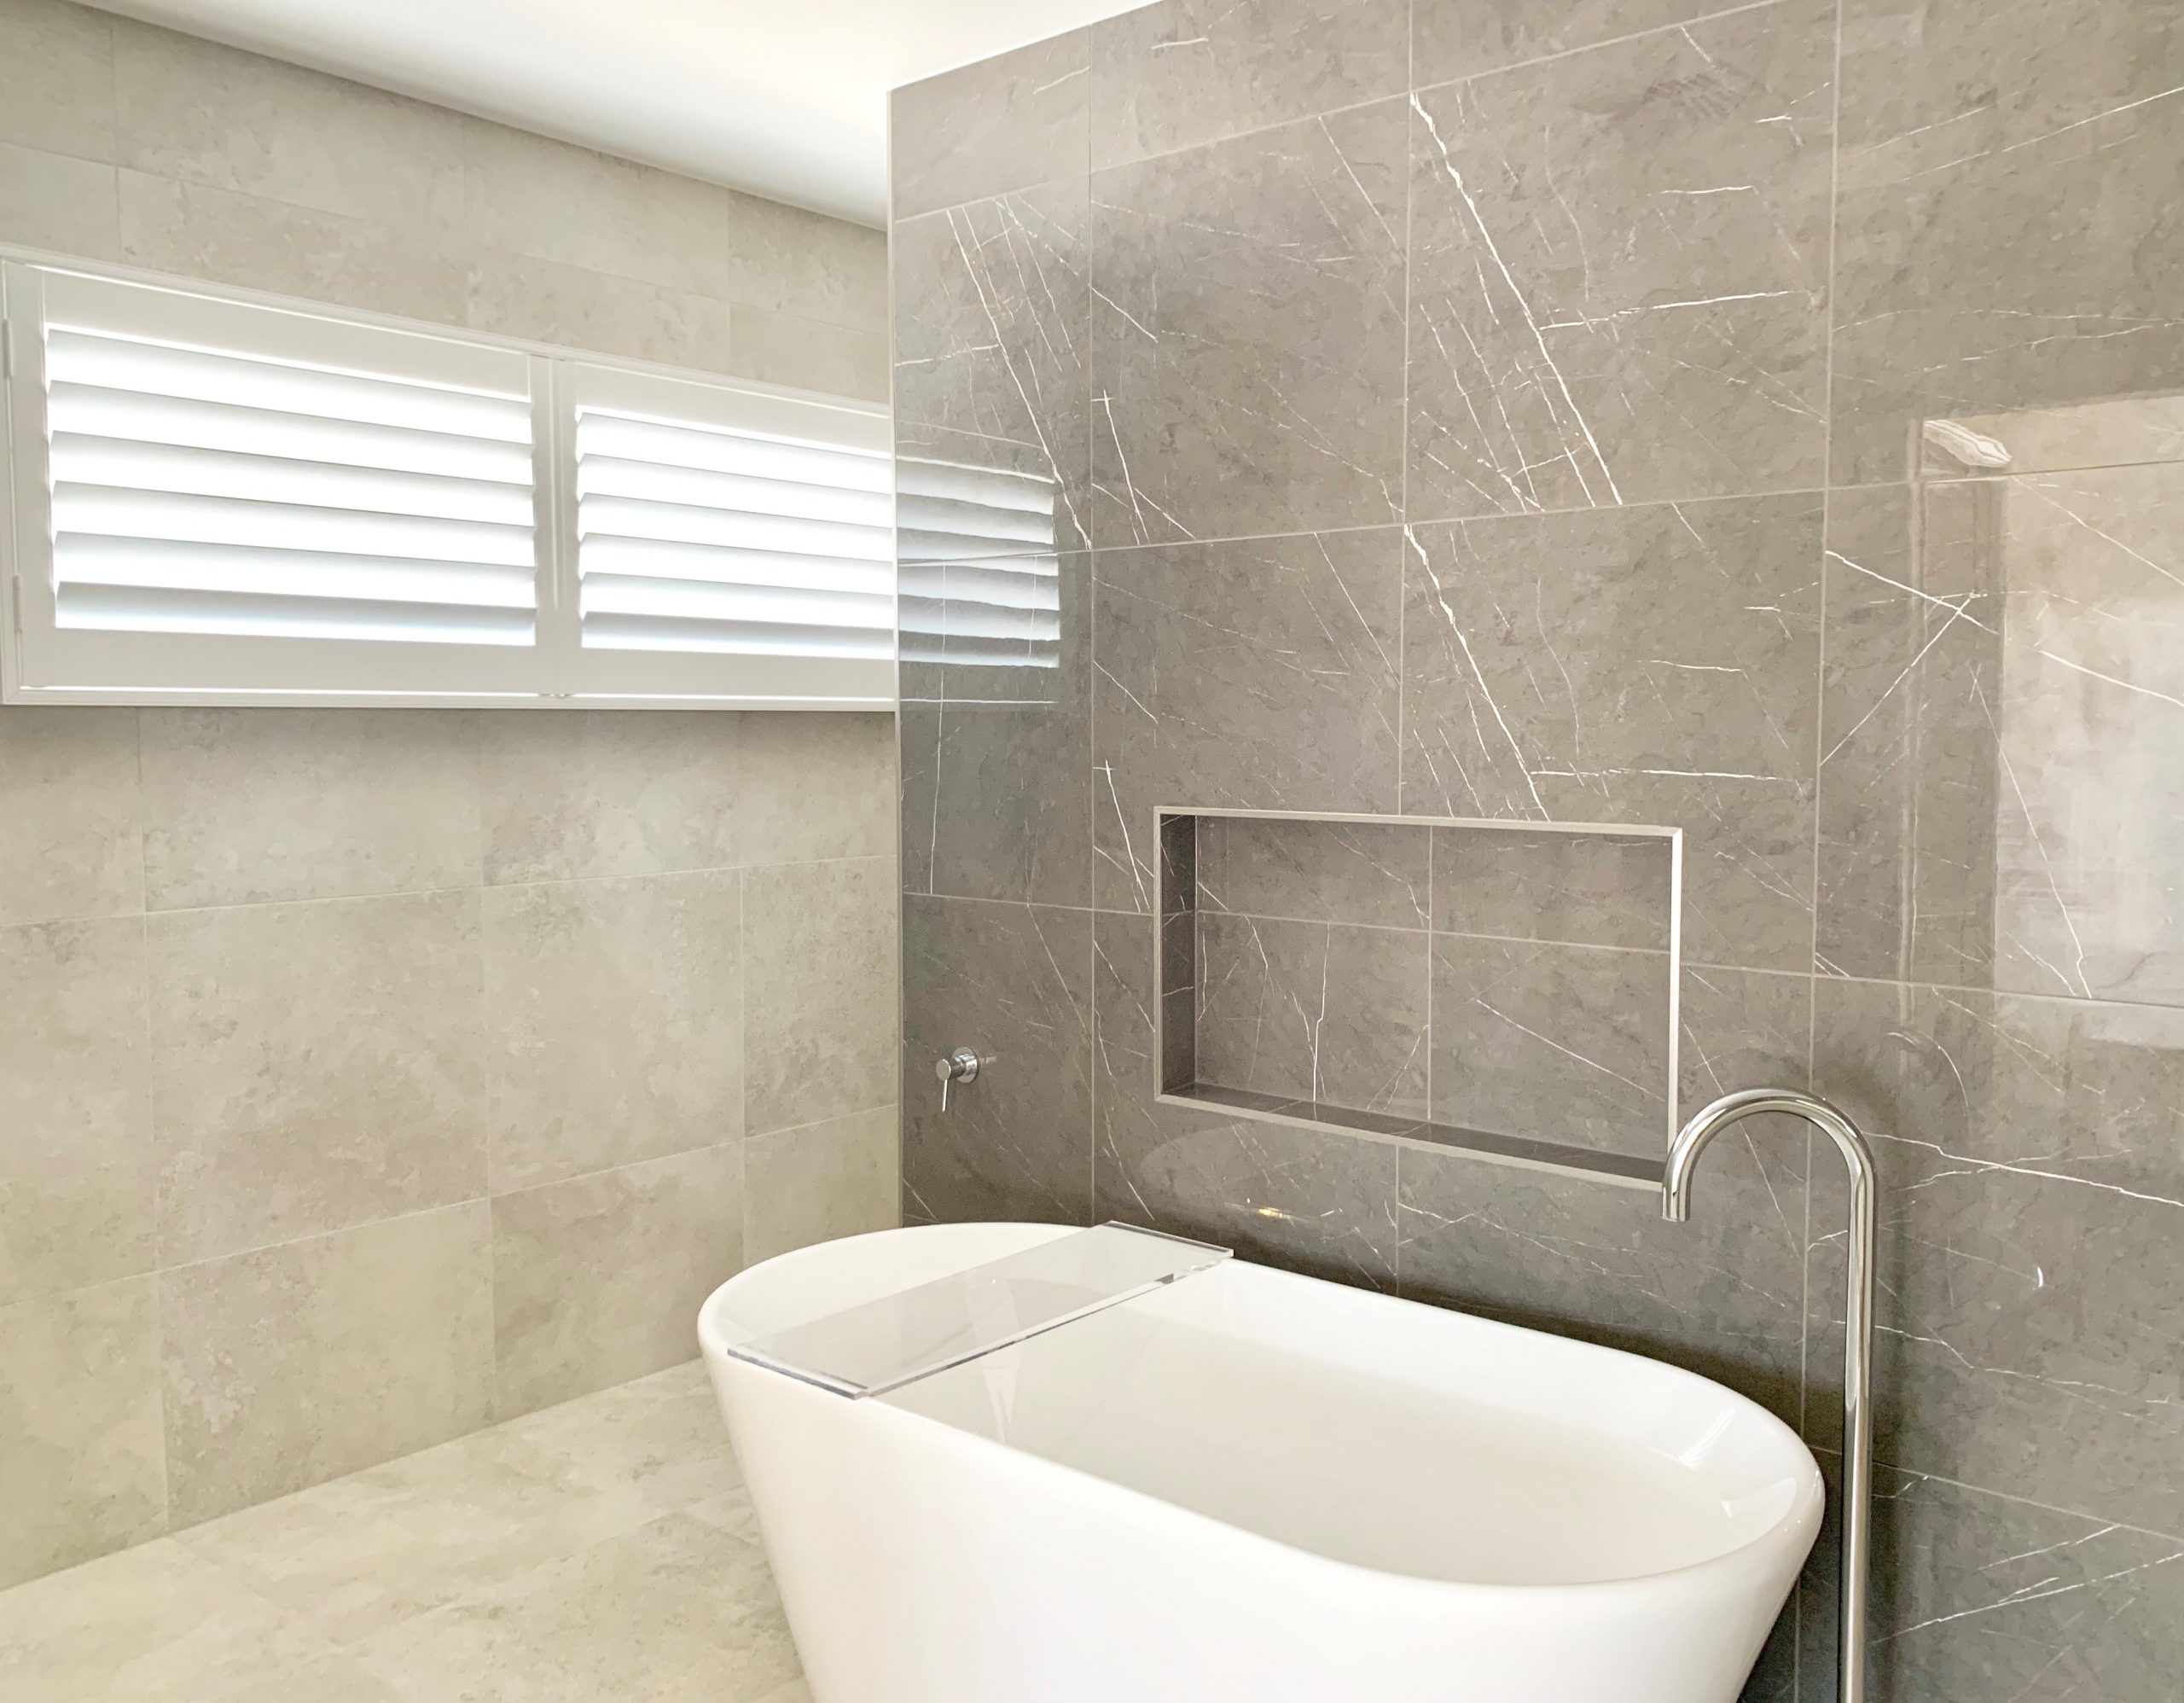 Shutters in a Modern Bathroom - Why Interior Designers Love Shutters Blog Featured Image